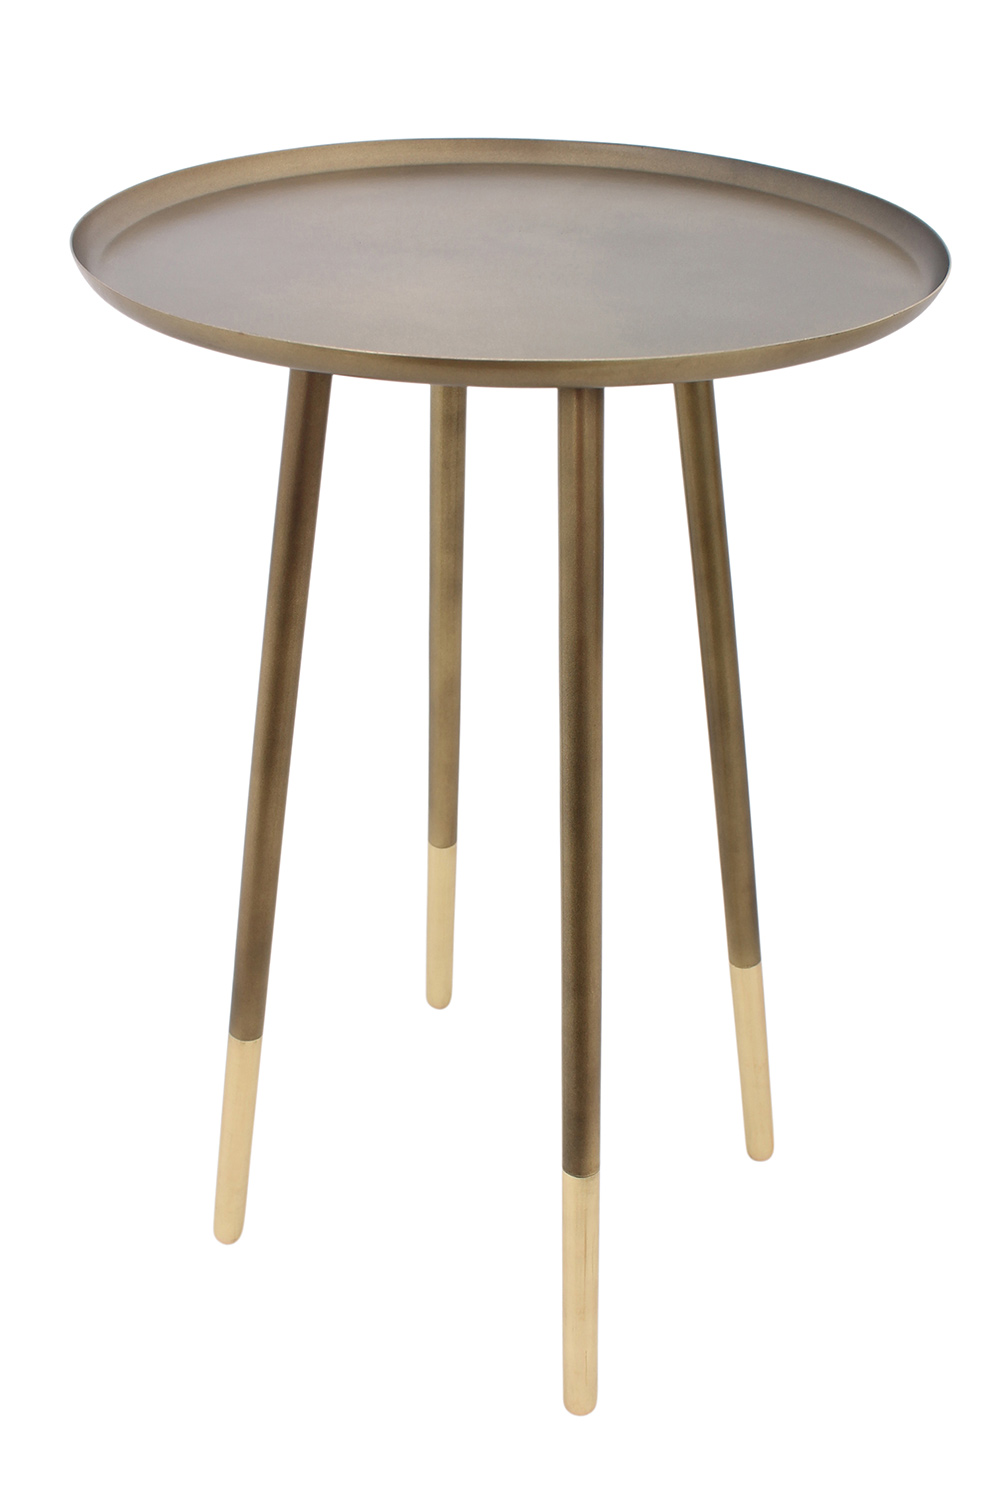 Ren-Wil Pawn Accent Table - Antique Brass